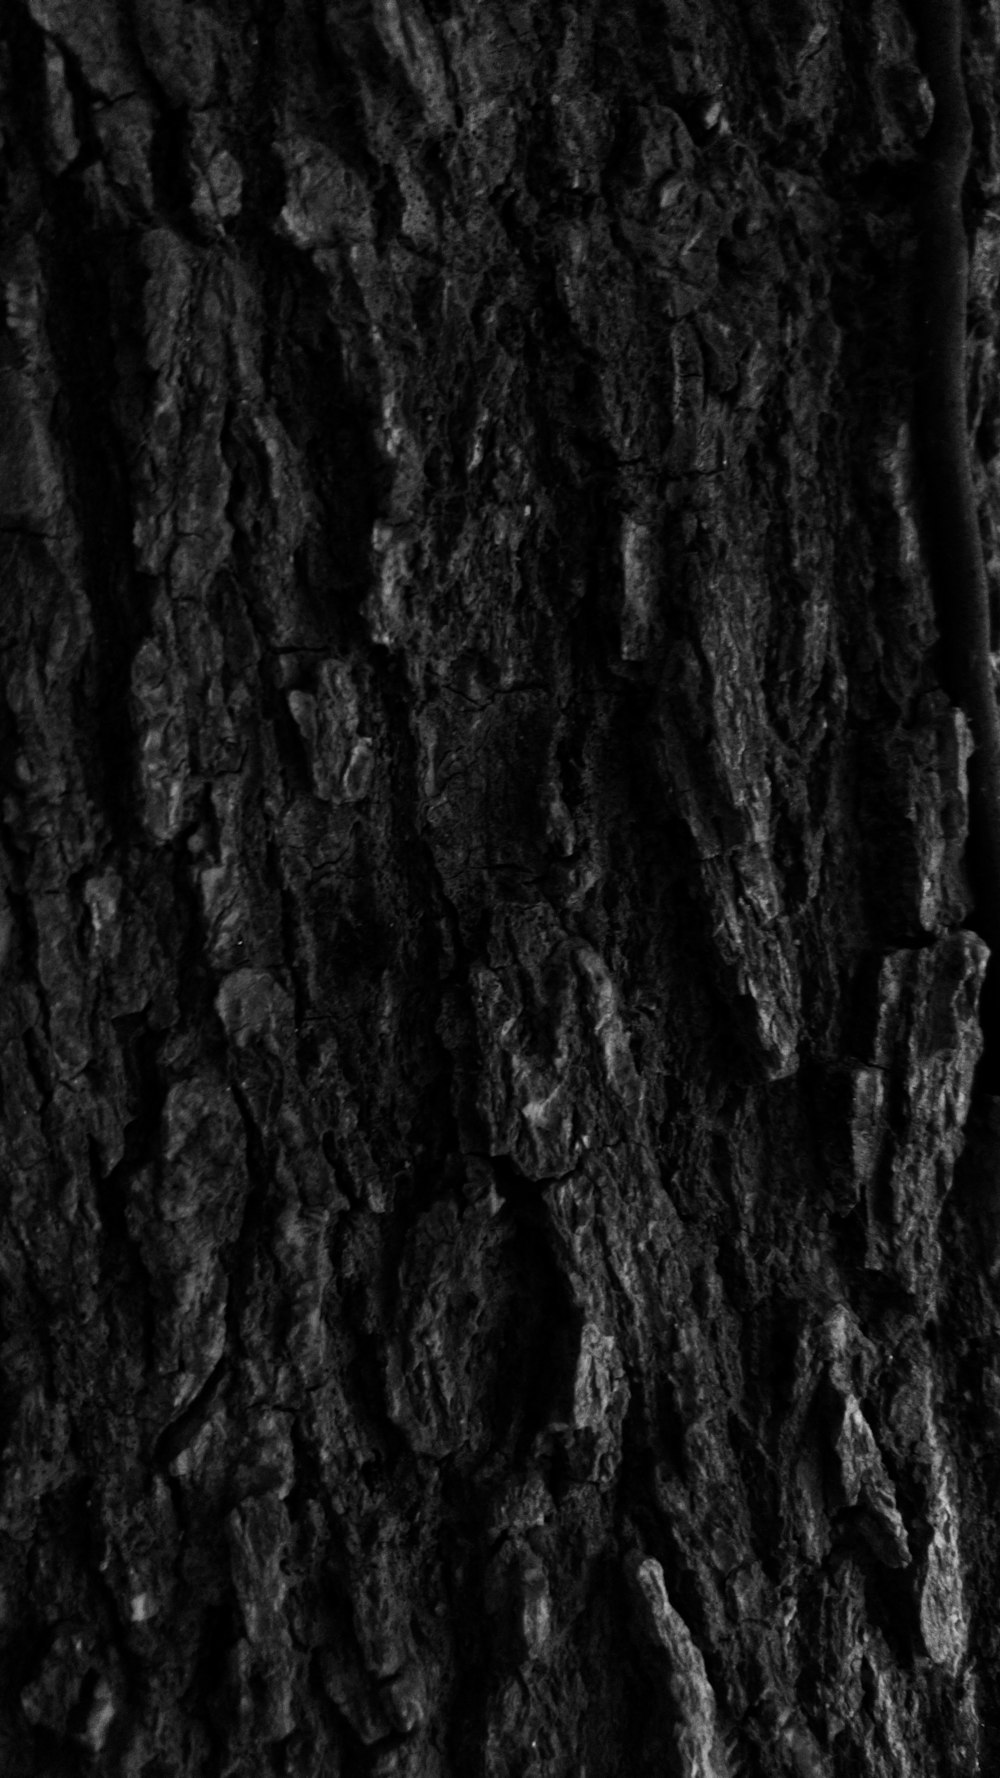 a black and white photo of the bark of a tree